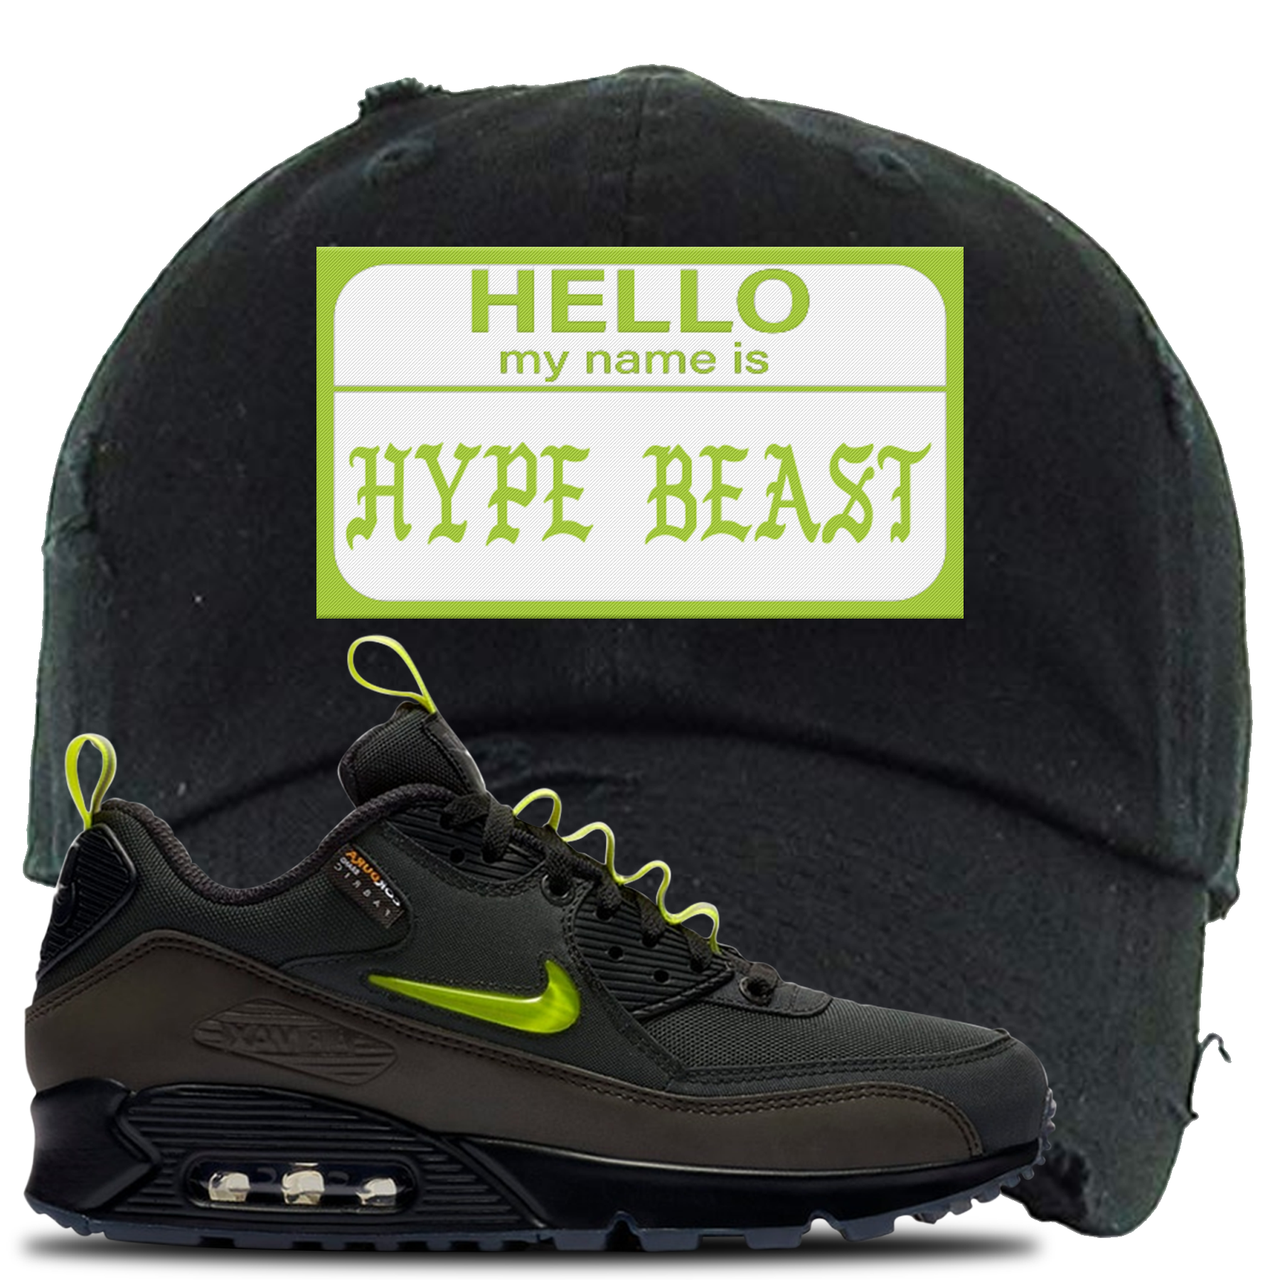 The Basement X Air Max 90 Manchester Hello My Name is Hype Beast Black Sneaker Hook Up Distressed Dad Hat